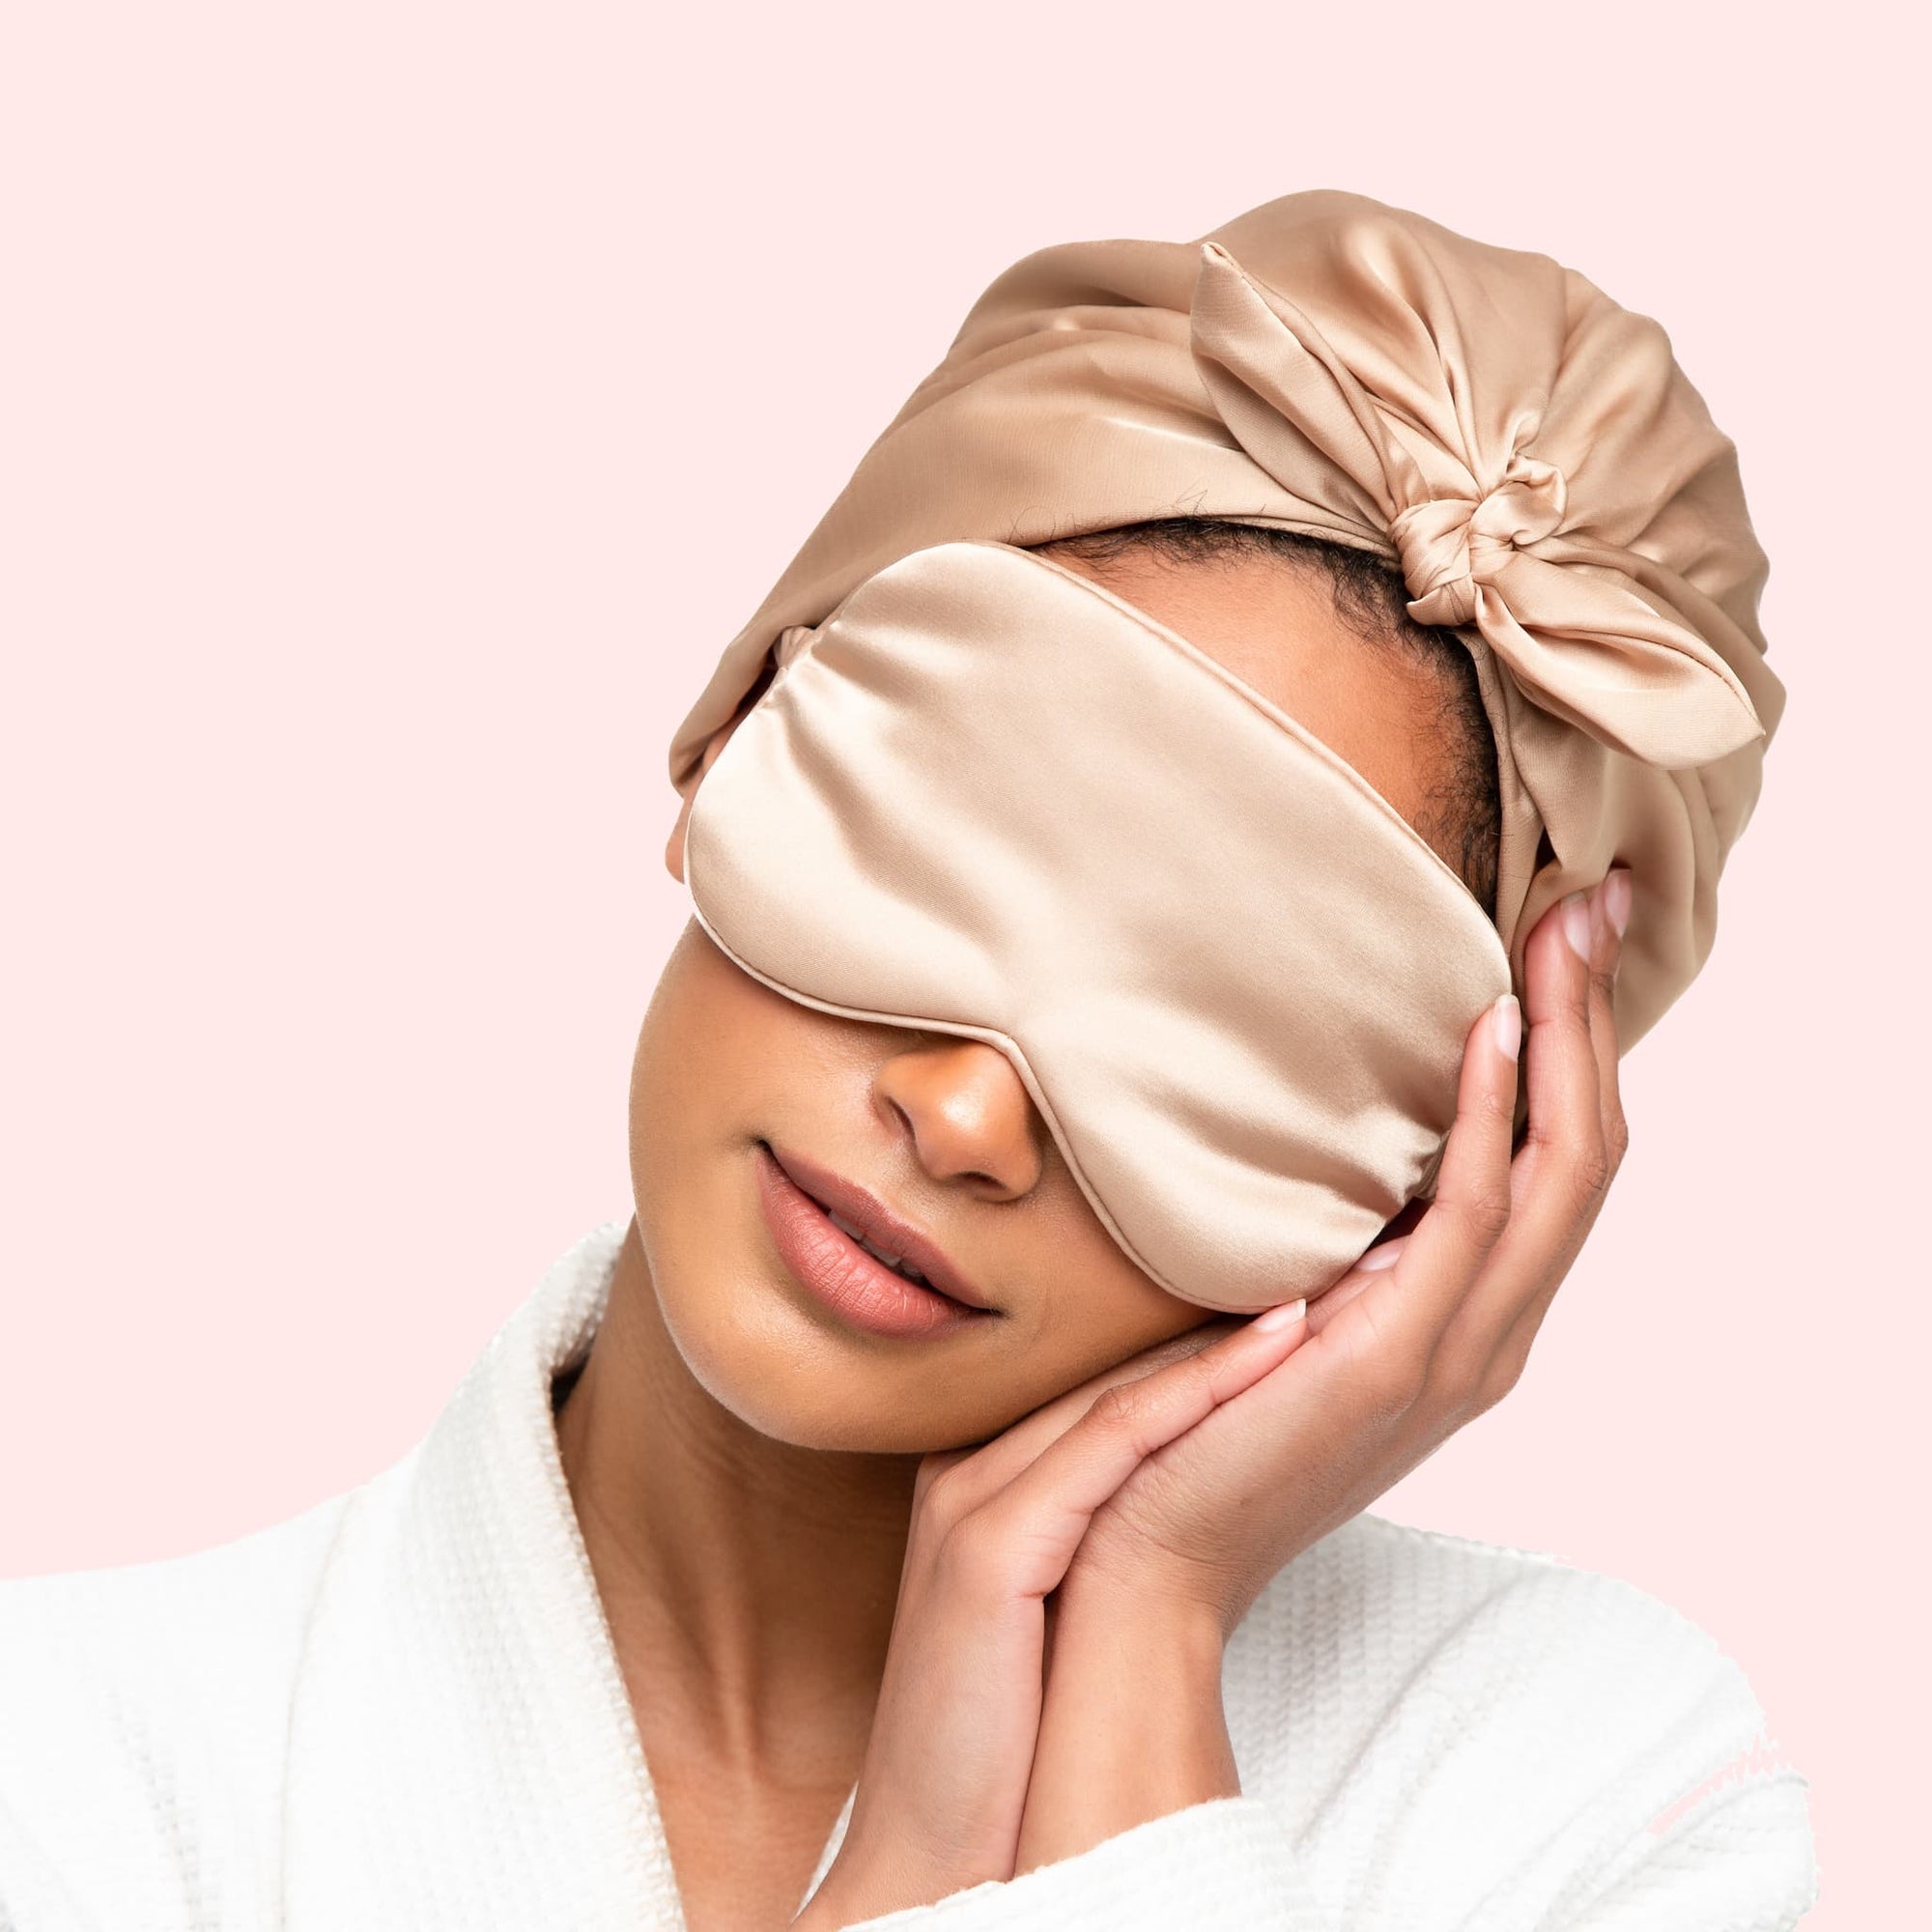 Only Curls Eye Mask and Sleep Turban Set - Bronze - Only Curls